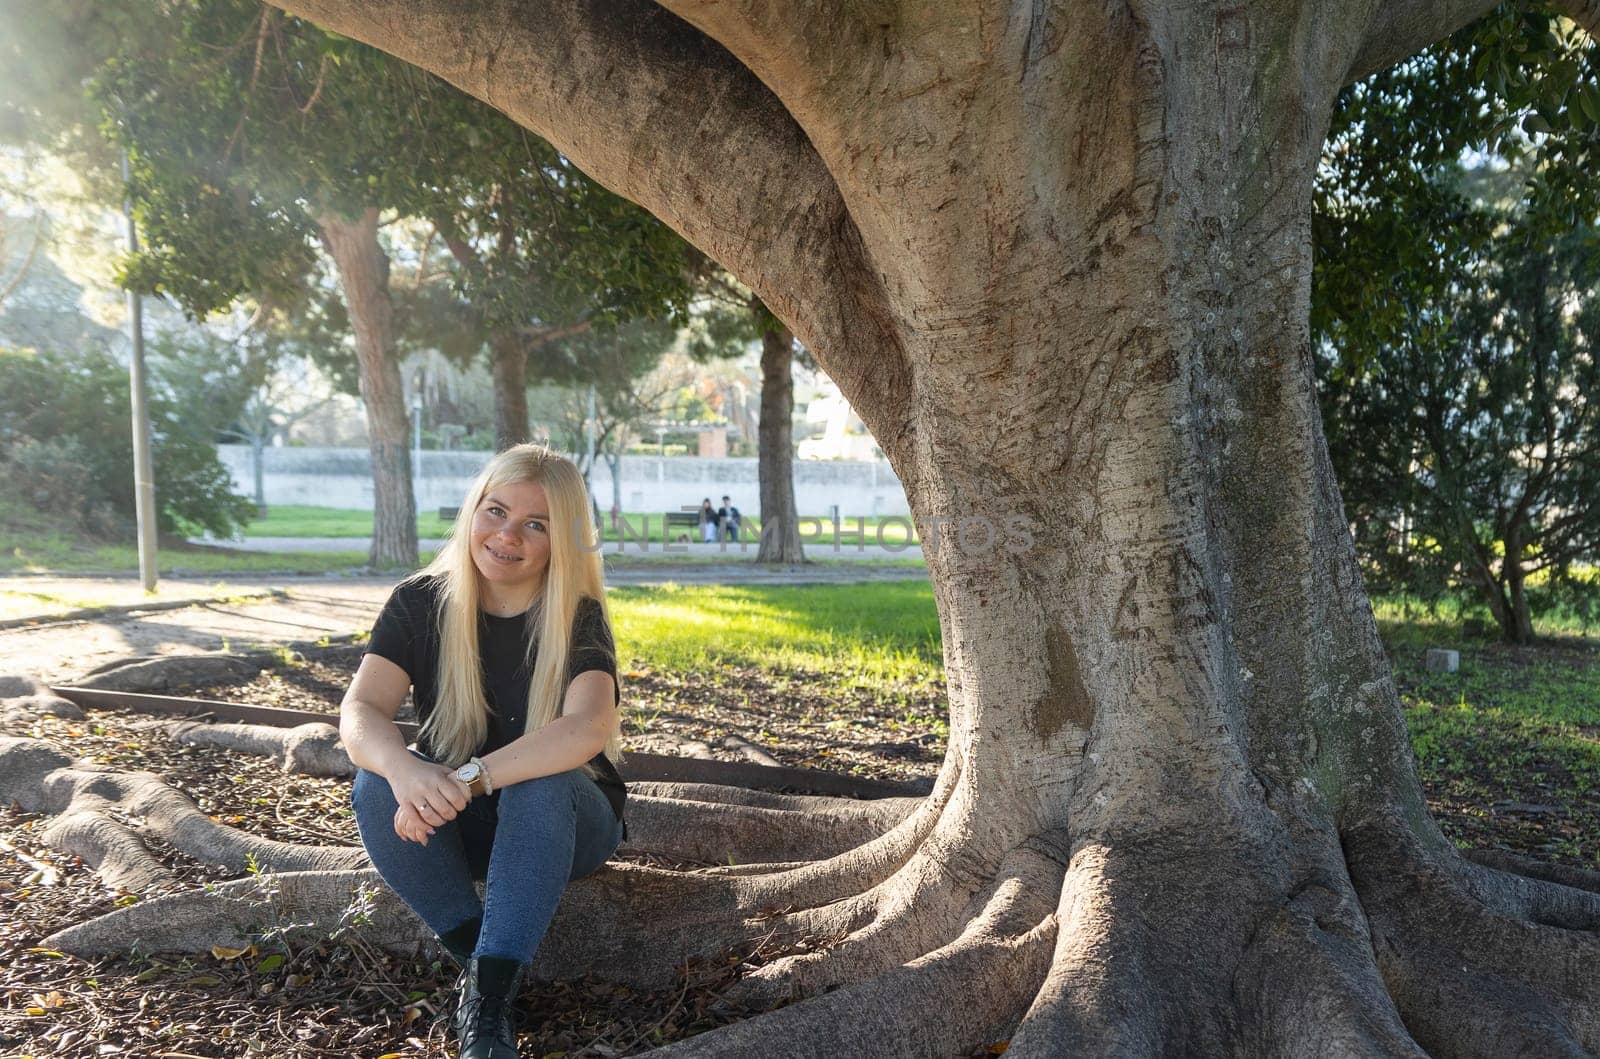 Young Woman with braces Smiling Under Tree in Park by Studia72